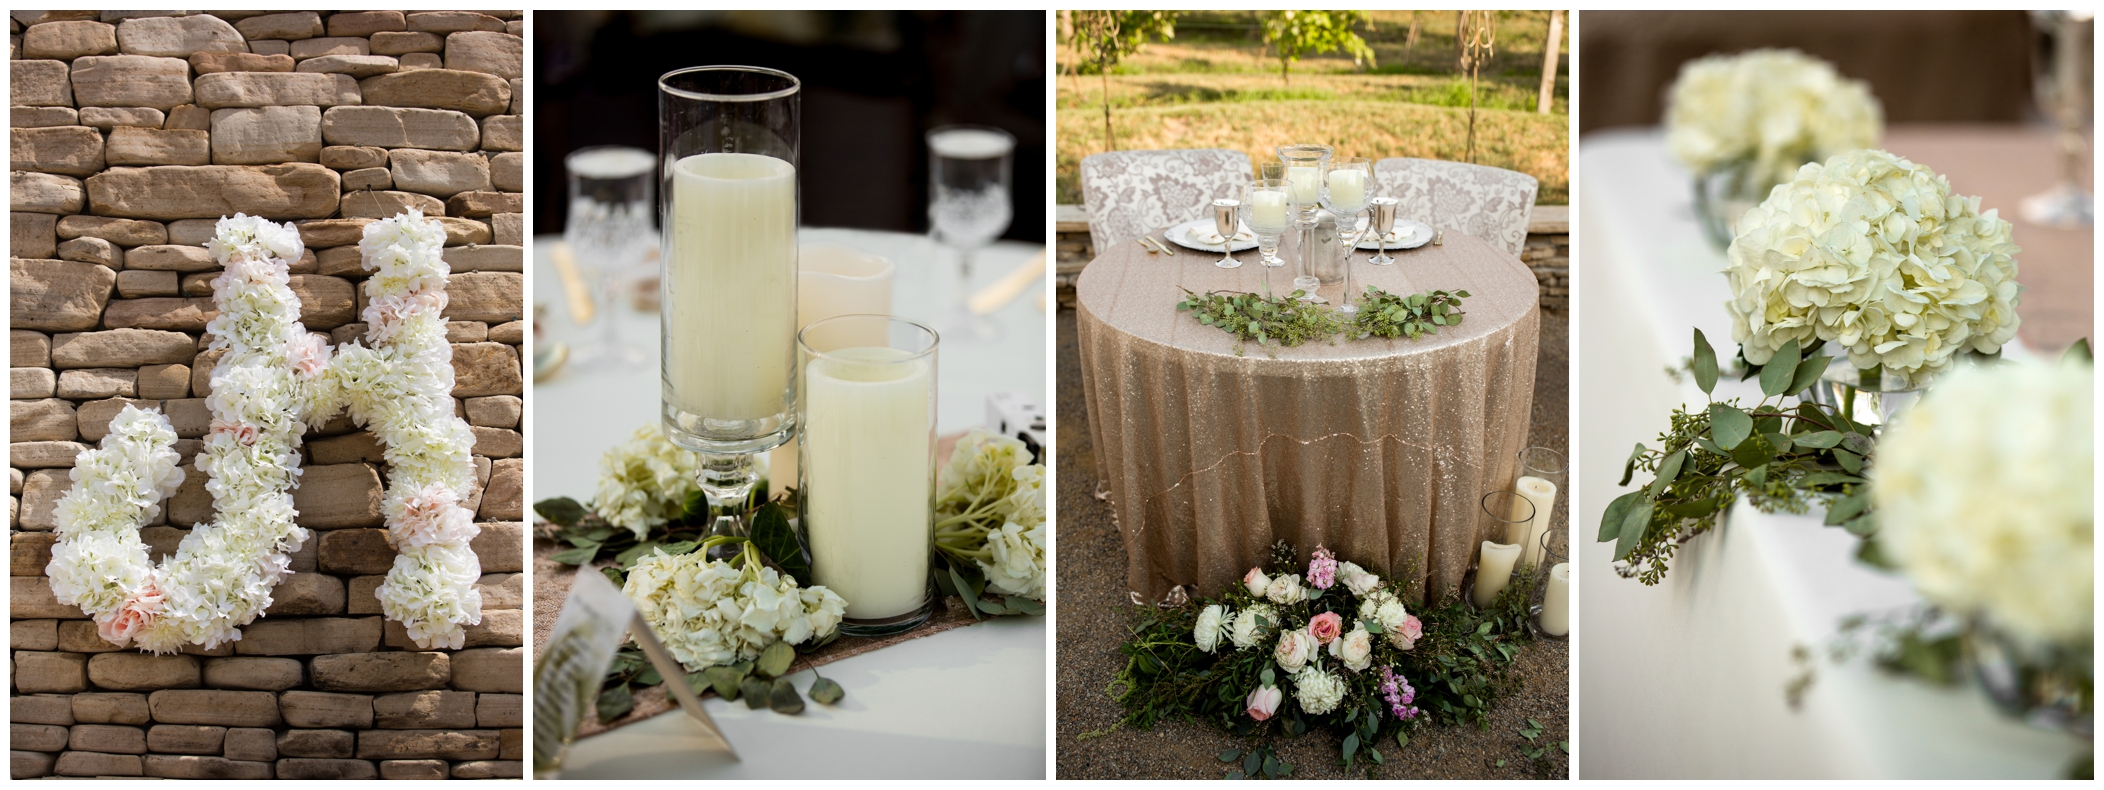 white rustic glam reception details 